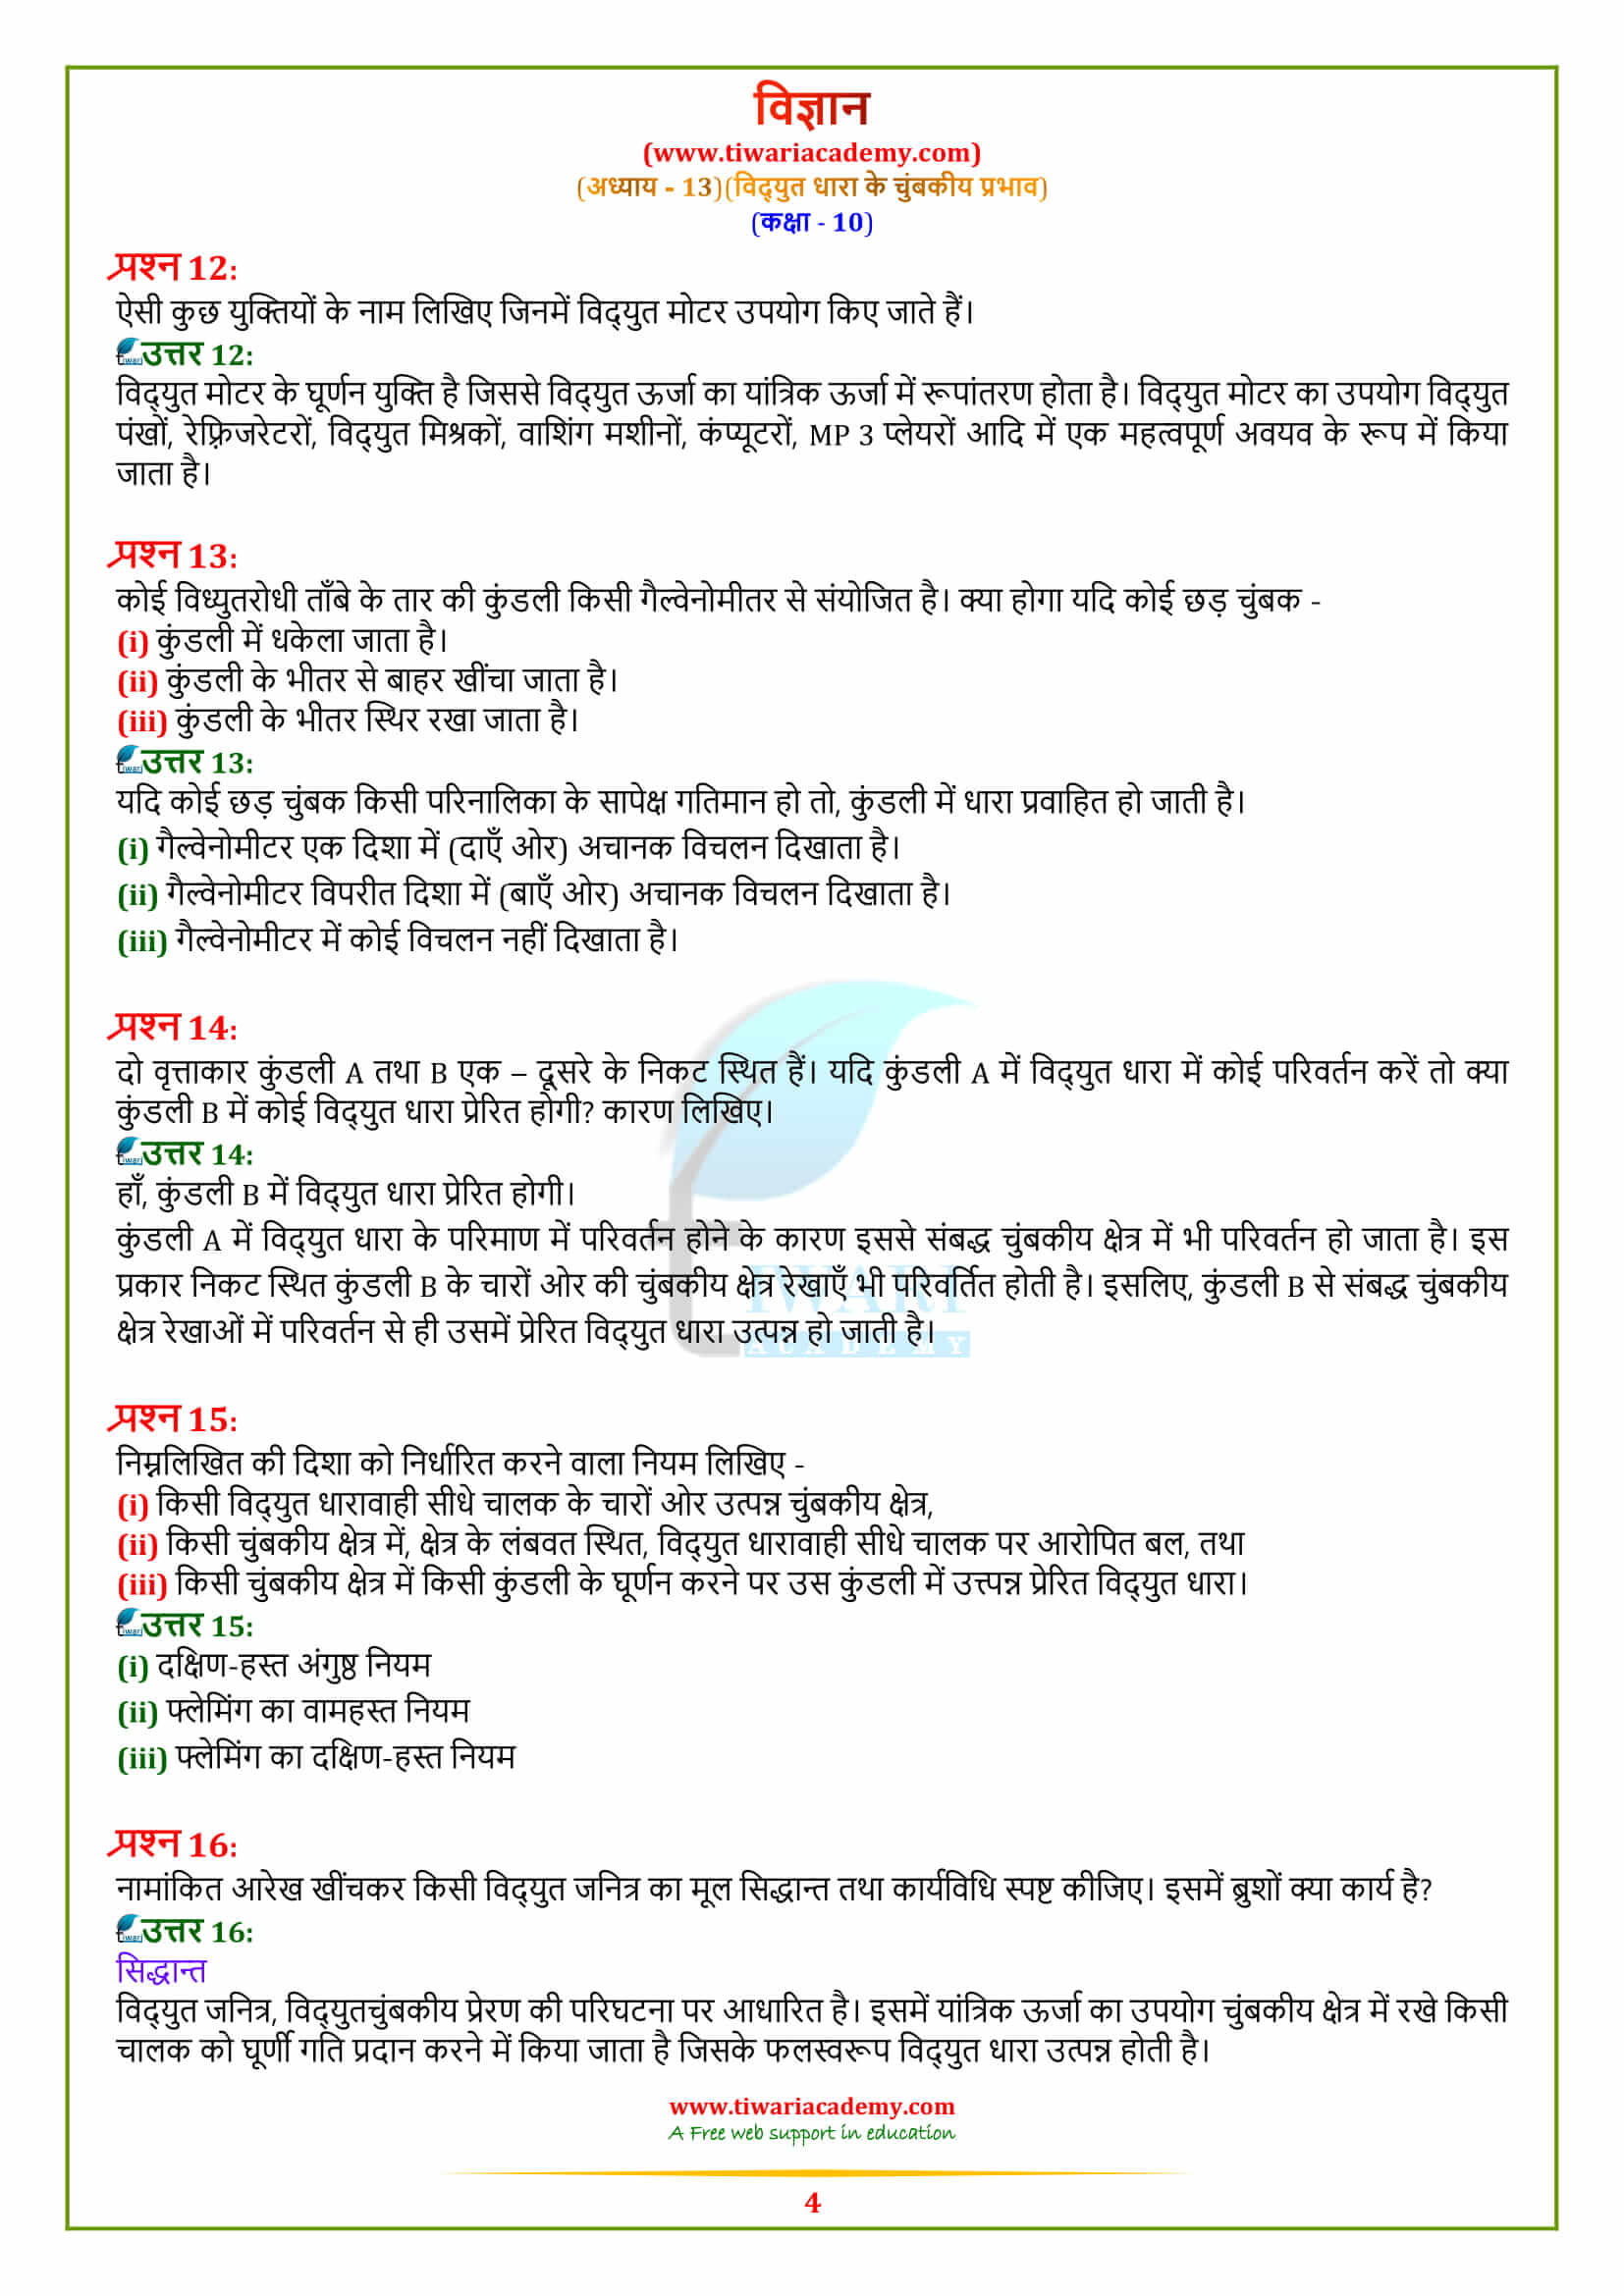 10 Science Chapter 13 Exercises solutions in Hindi guide free